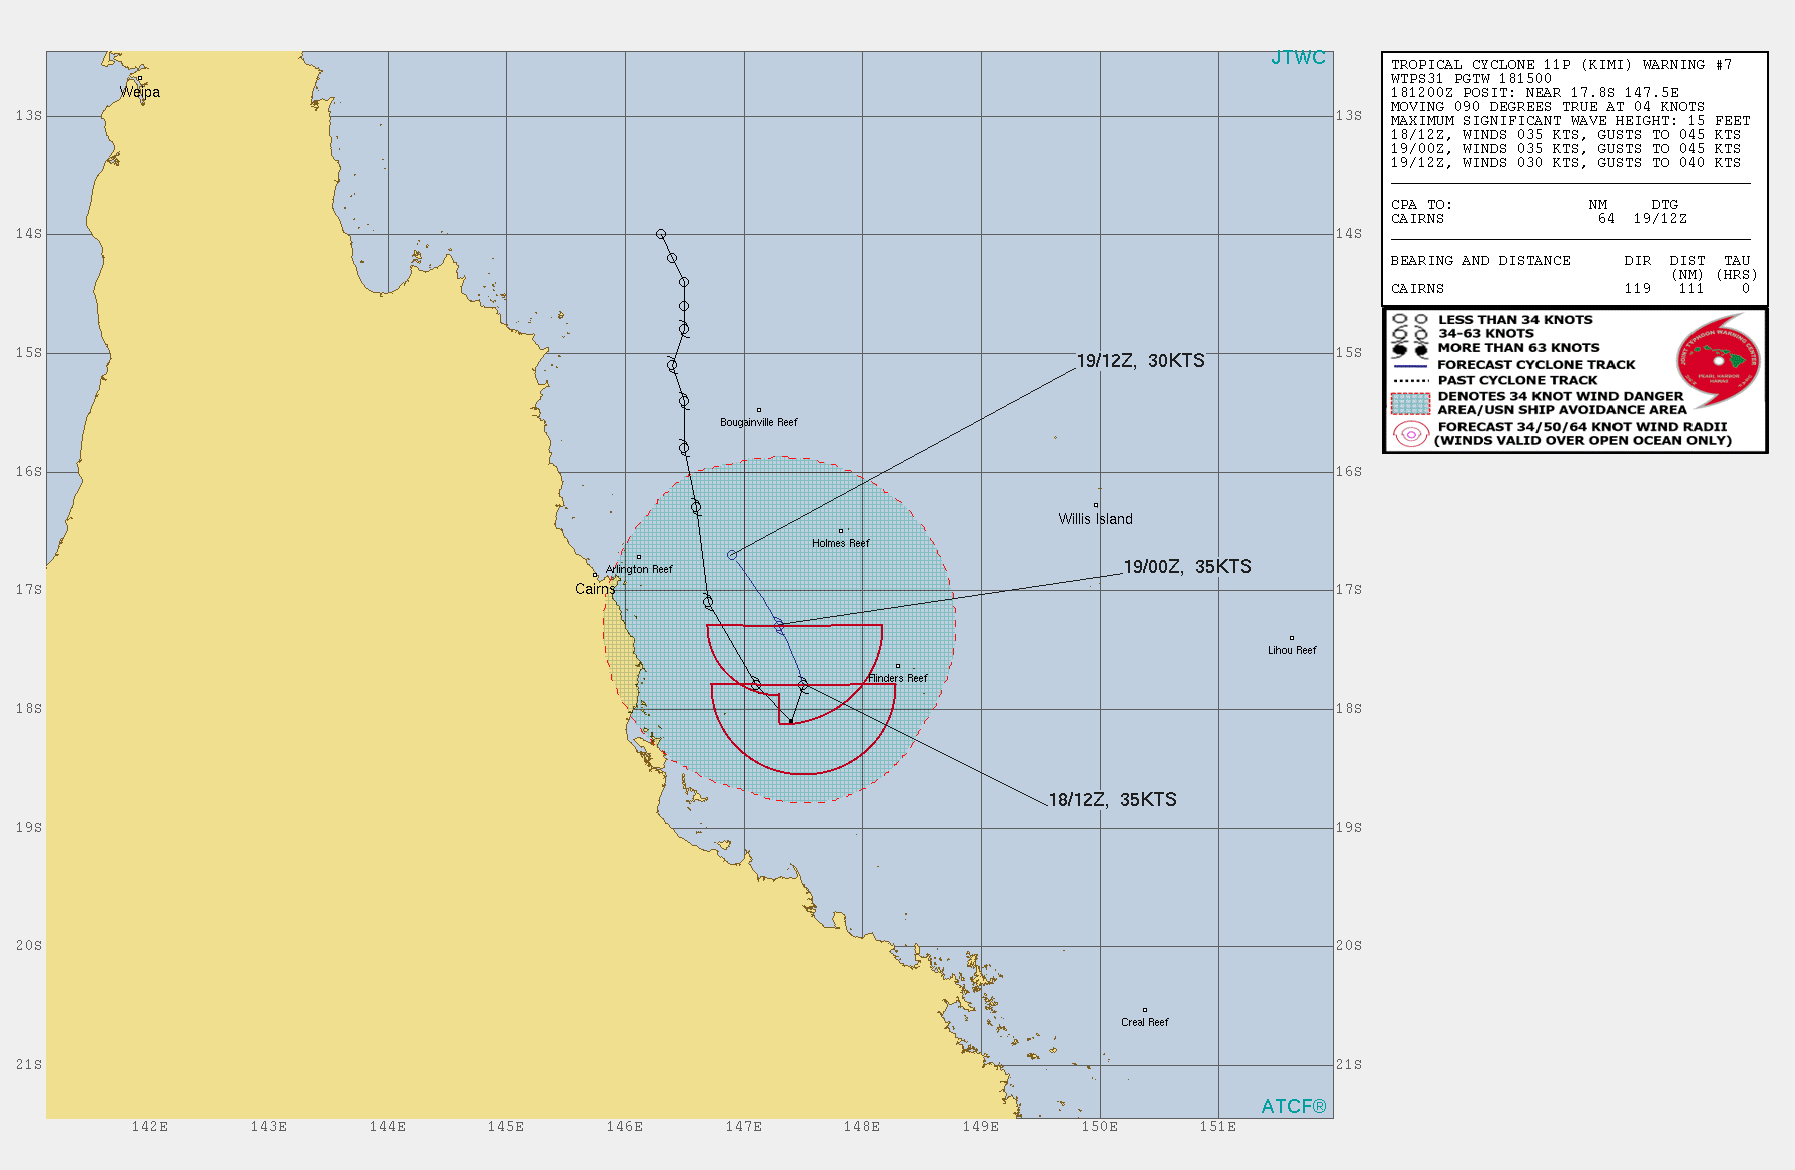 WARNING 7. THE SYSTEM WILL TRACK EQUATORWARD THROUGH THE  FORECAST PERIOD WITH STEADY WEAKENING AND DISSIPATION ANTICIPATED BY  24H. DUE TO THE COMPLEX, EVOLVING STEERING INFLUENCES AND POOR  MODEL AGREEMENT, THERE IS LOW CONFIDENCE (HIGH UNCERTAINTY) IN THE  JTWC FORECAST TRACK.